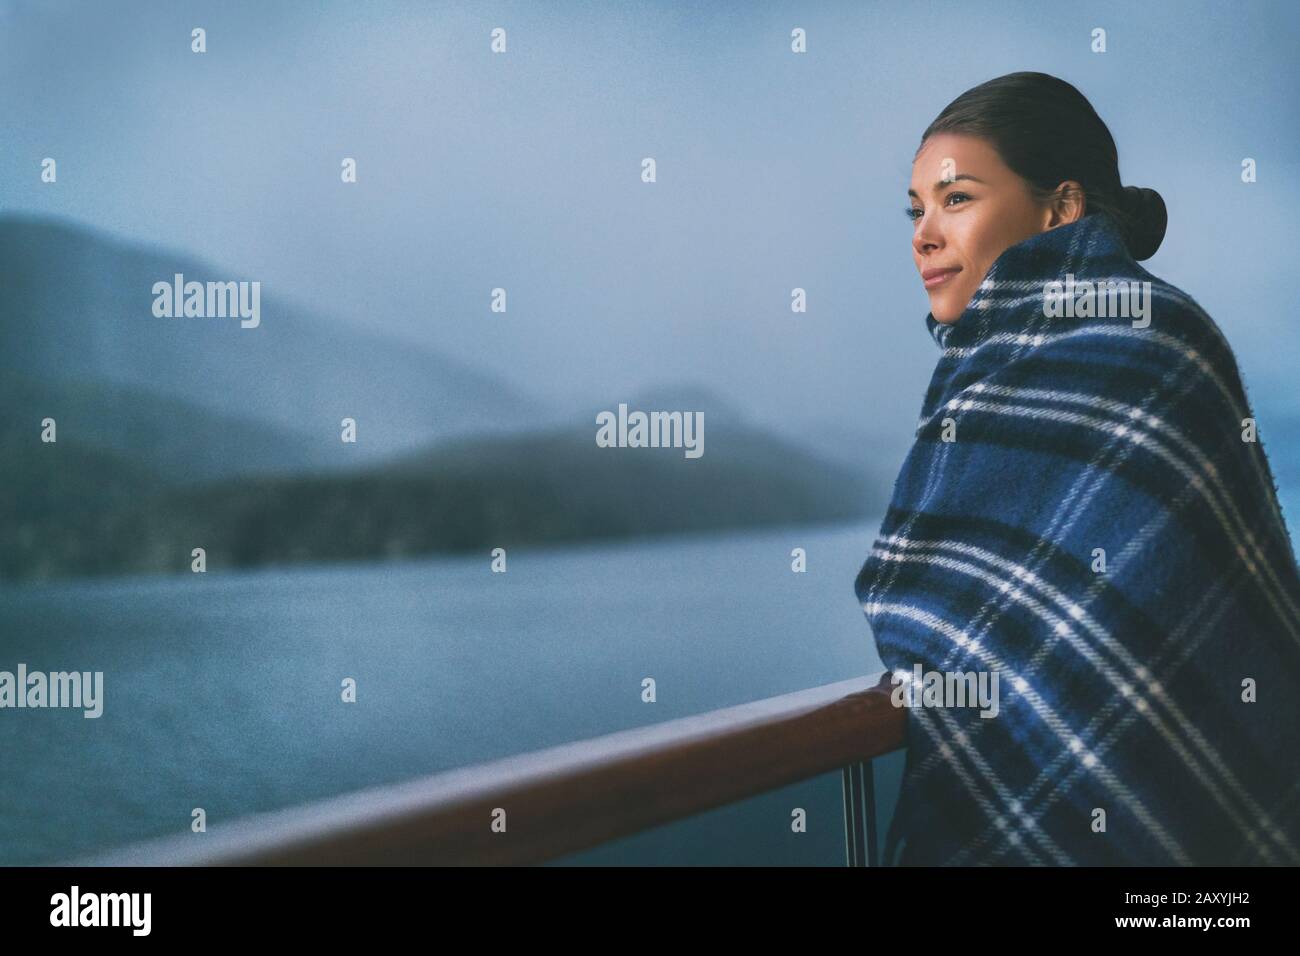 Cruise ship passenger on Alaska travel vacation enjoying scenery at dusk on suite balcony deck with wool throw in cold weather. Asian tourist woman relaxing on summer holiday cruising adventure. Stock Photo